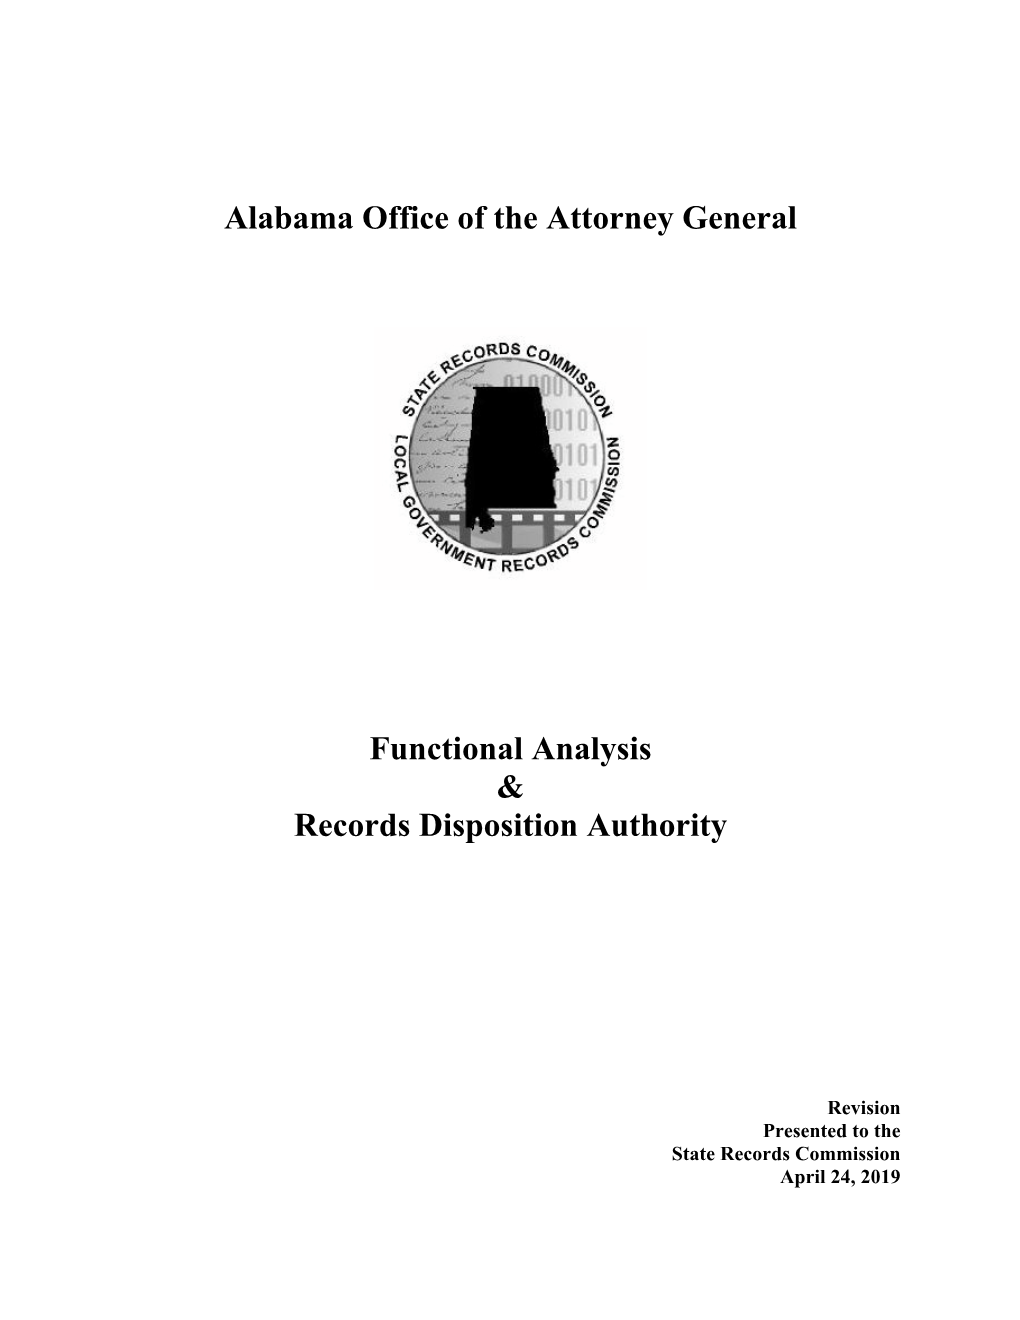 Alabama Office of the Attorney General Functional Analysis & Records Disposition Authority